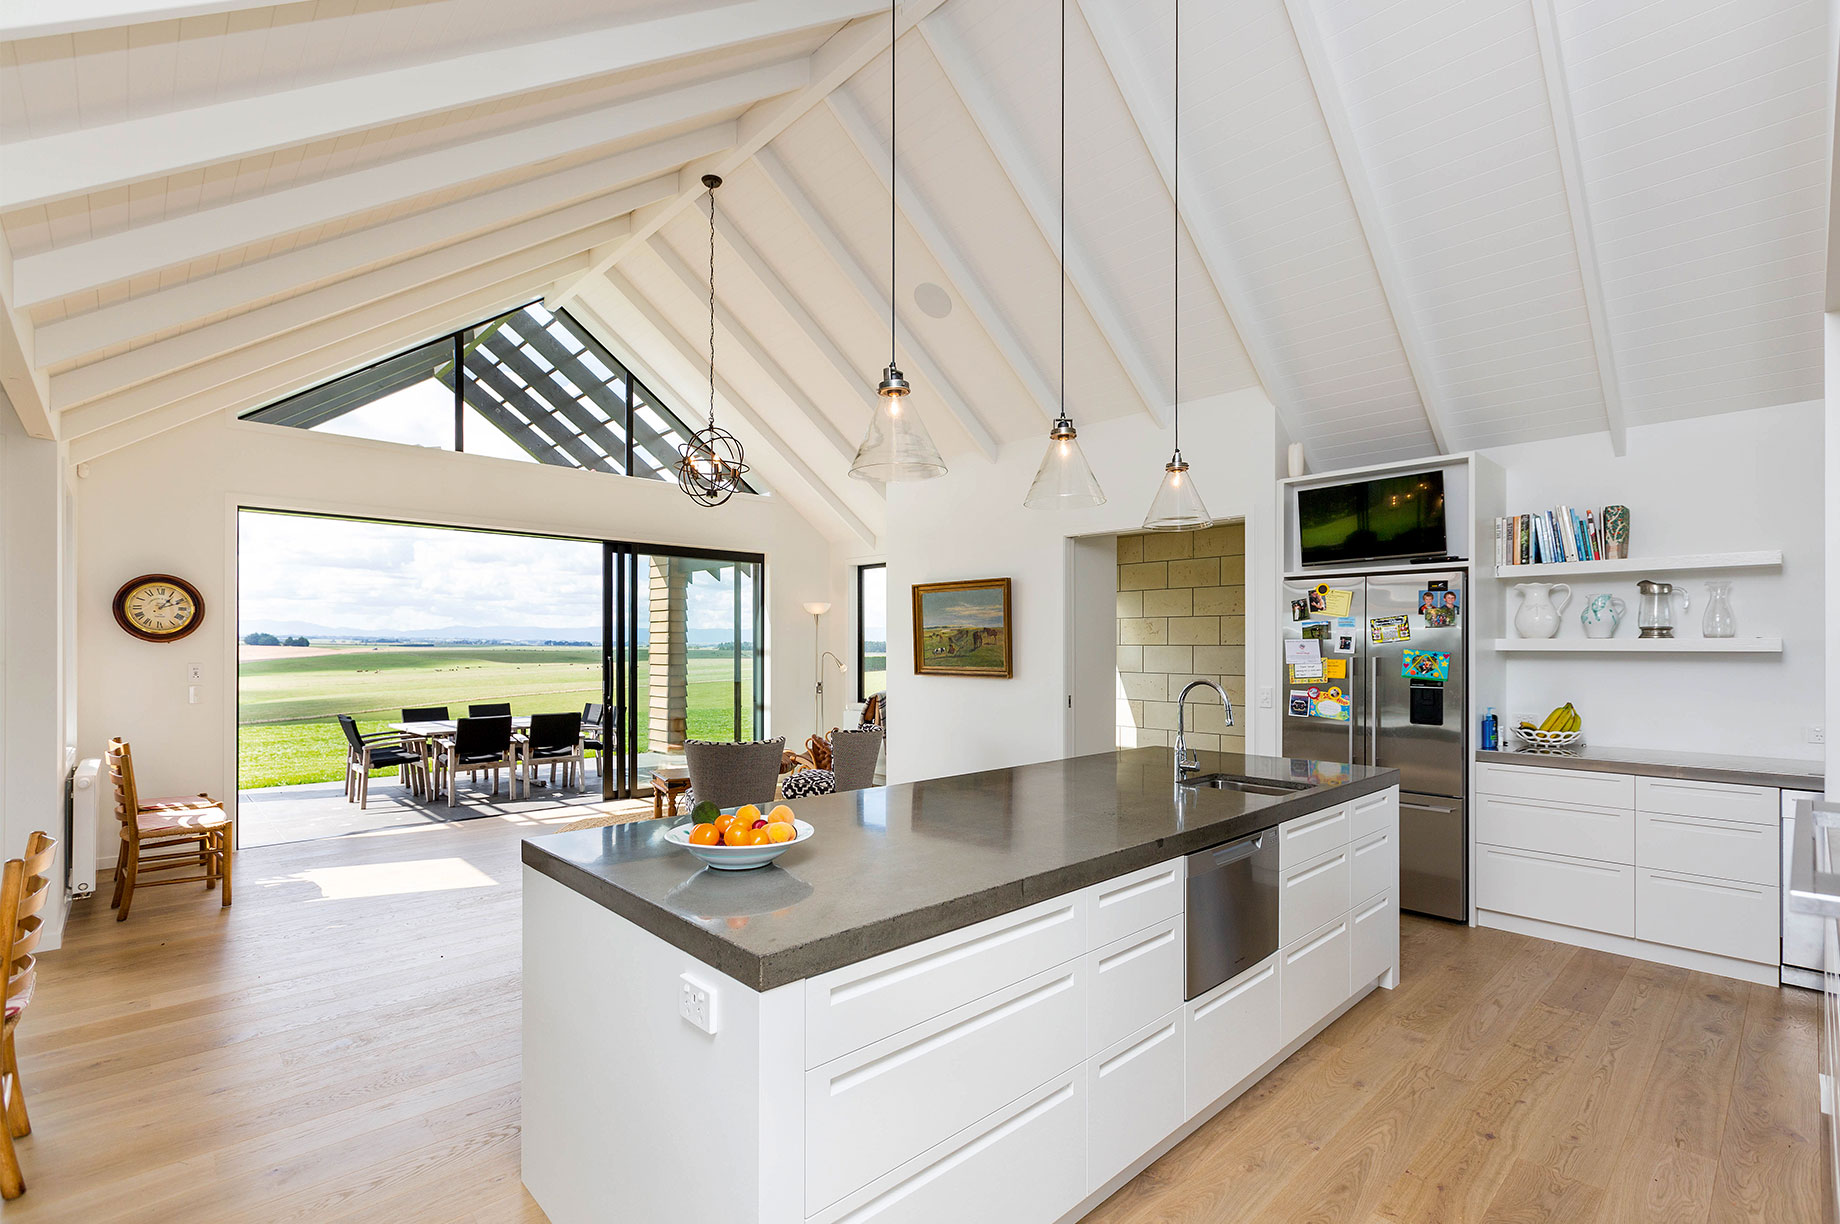 Kitchen and dining area overlooking farmland